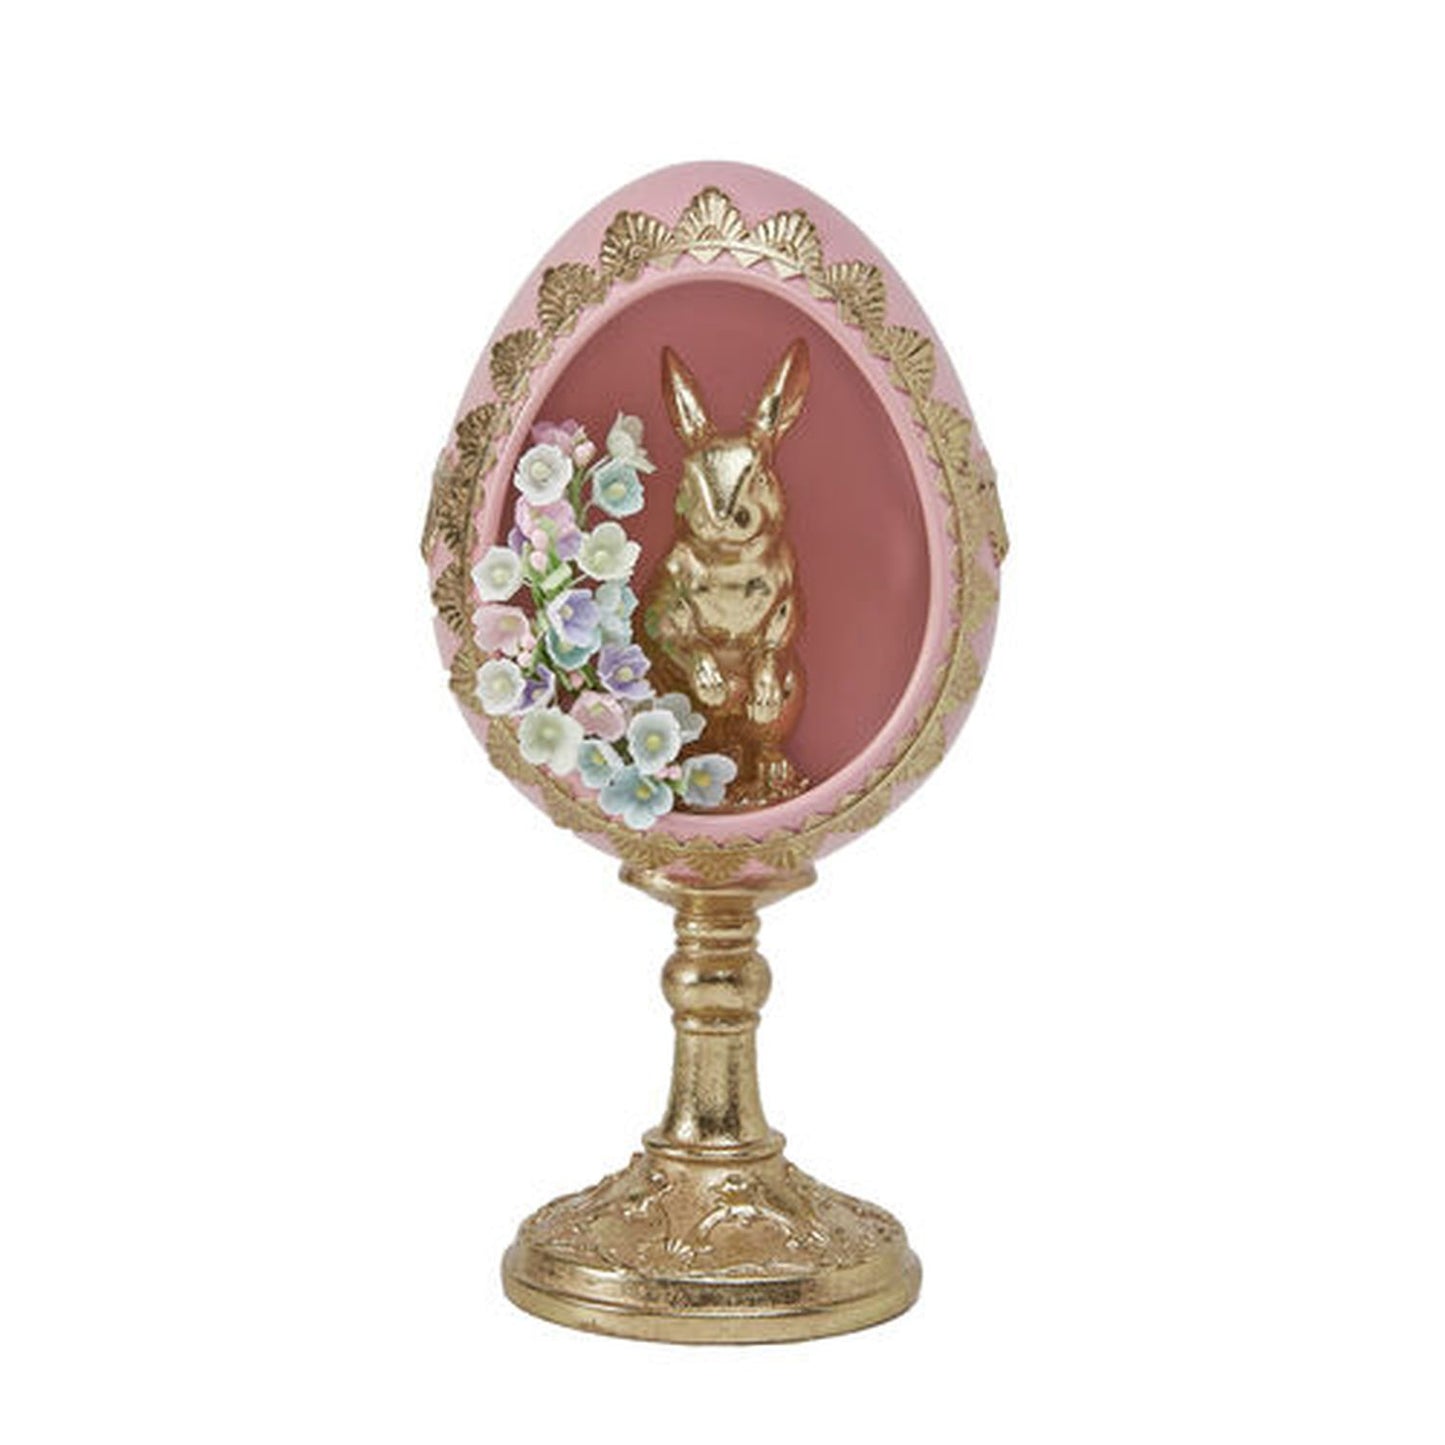 December Diamonds Spring Confections 8" Pink Egg With Gold Bunny Inside